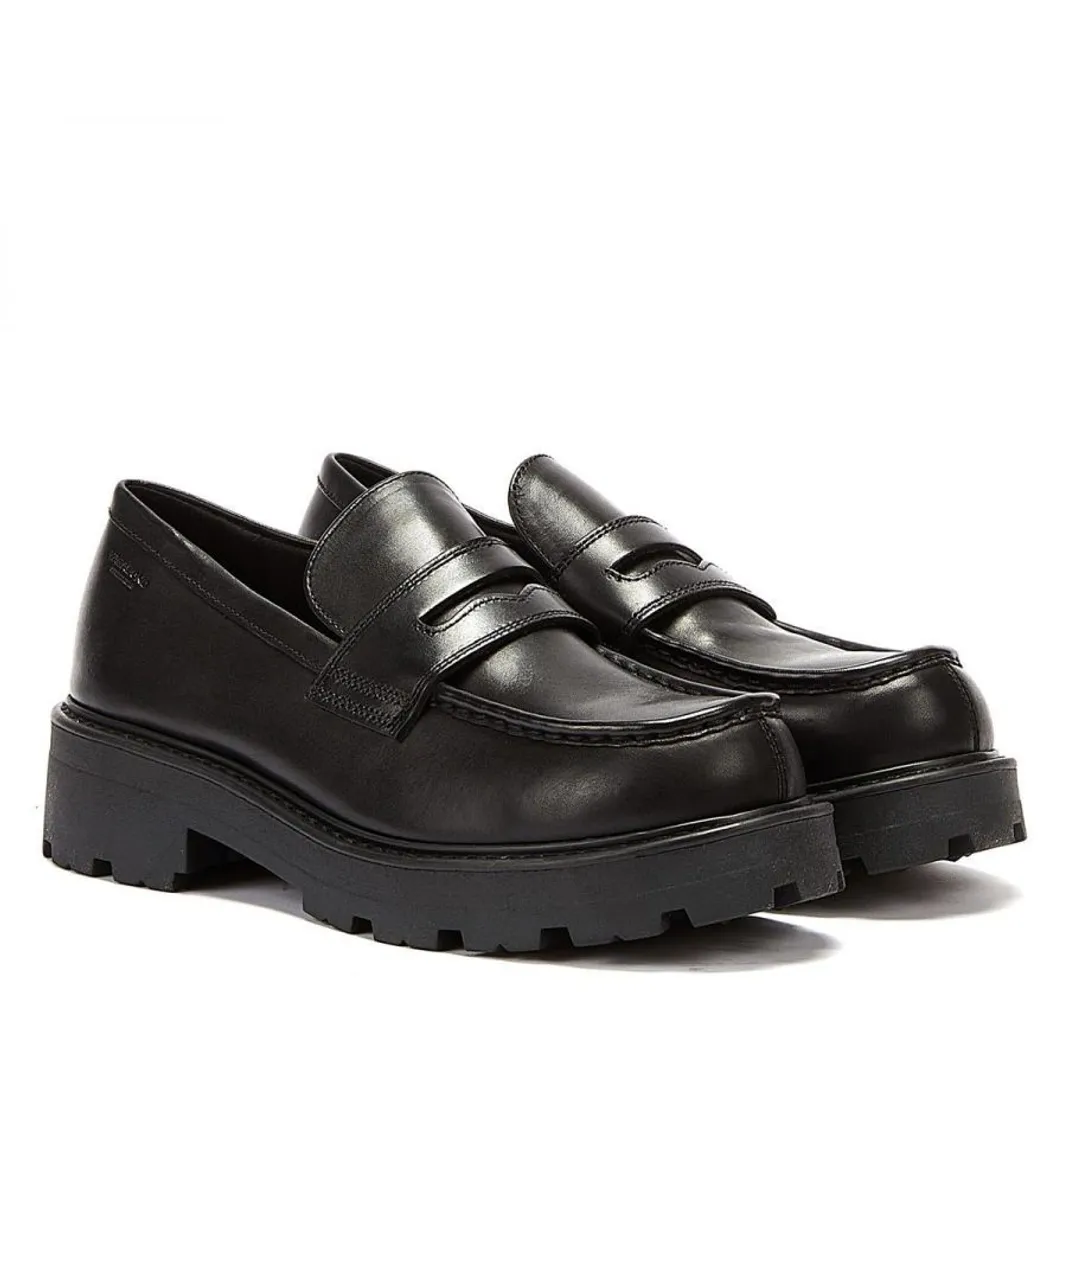 Vagabond Cosmo 2.0 Womens Loafers - Black Leather